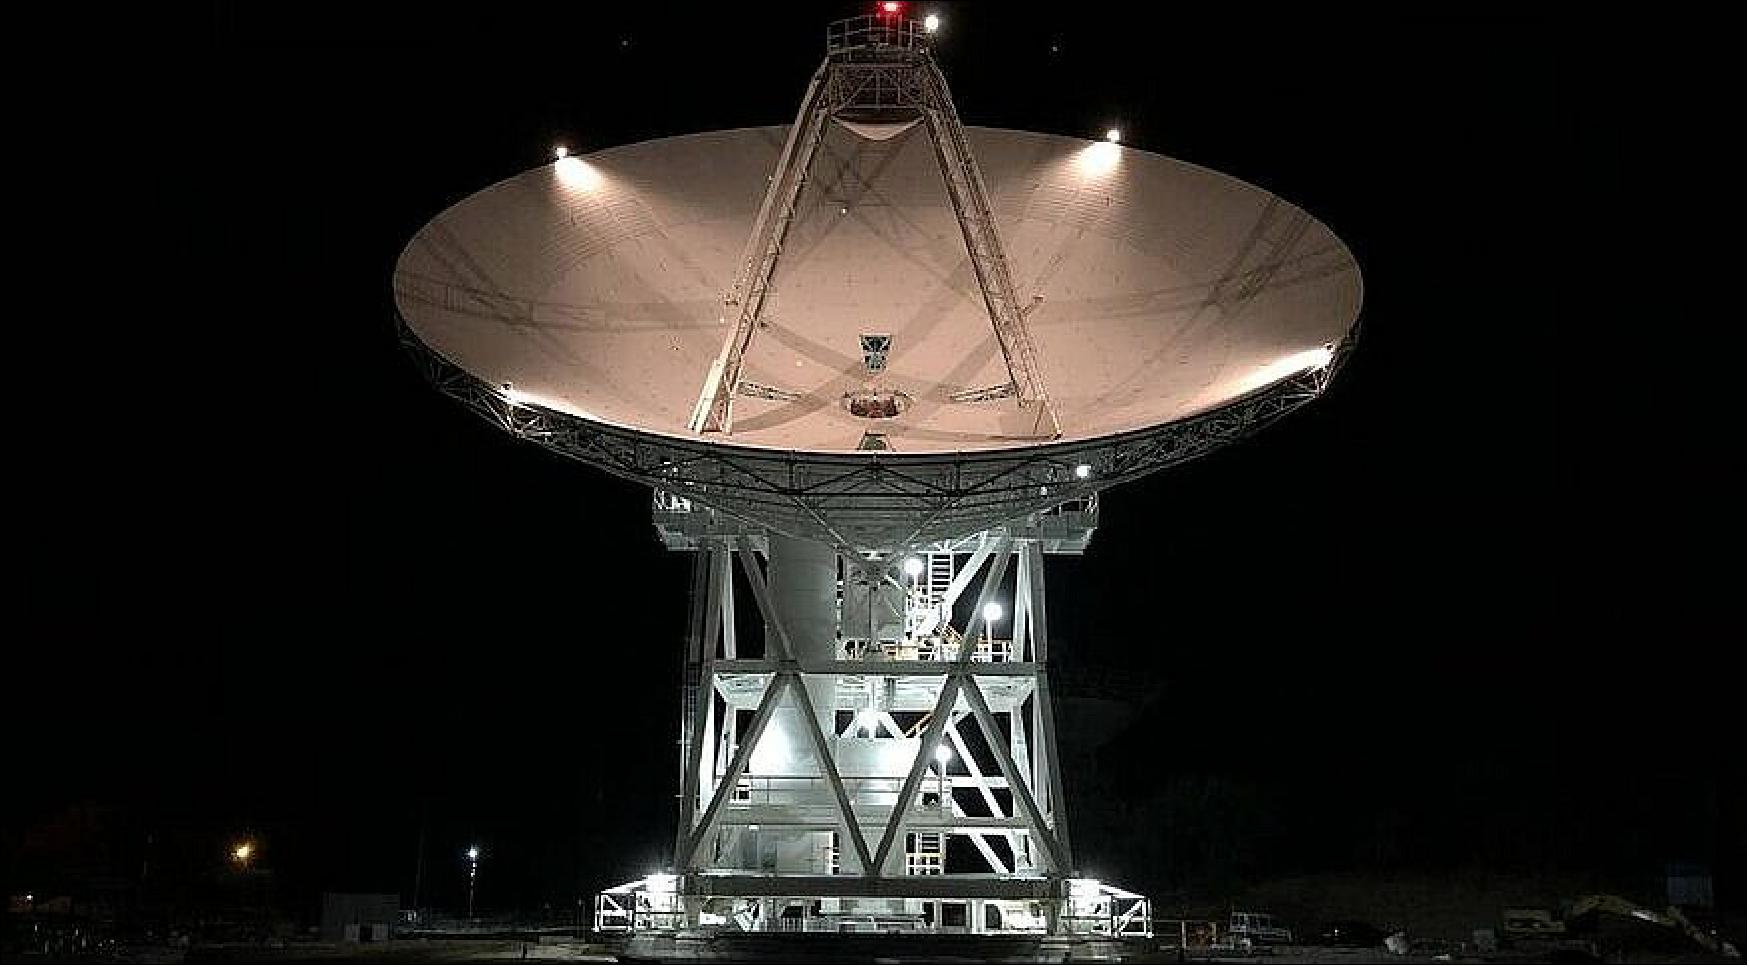 Figure 9: Deep Space Station 56 in Madrid is part of NASA's Deep Space Network. The 34-meter-wide dish is located at the Madrid Deep Space Communications Complex (image credit: NASA/JPL-Caltech)